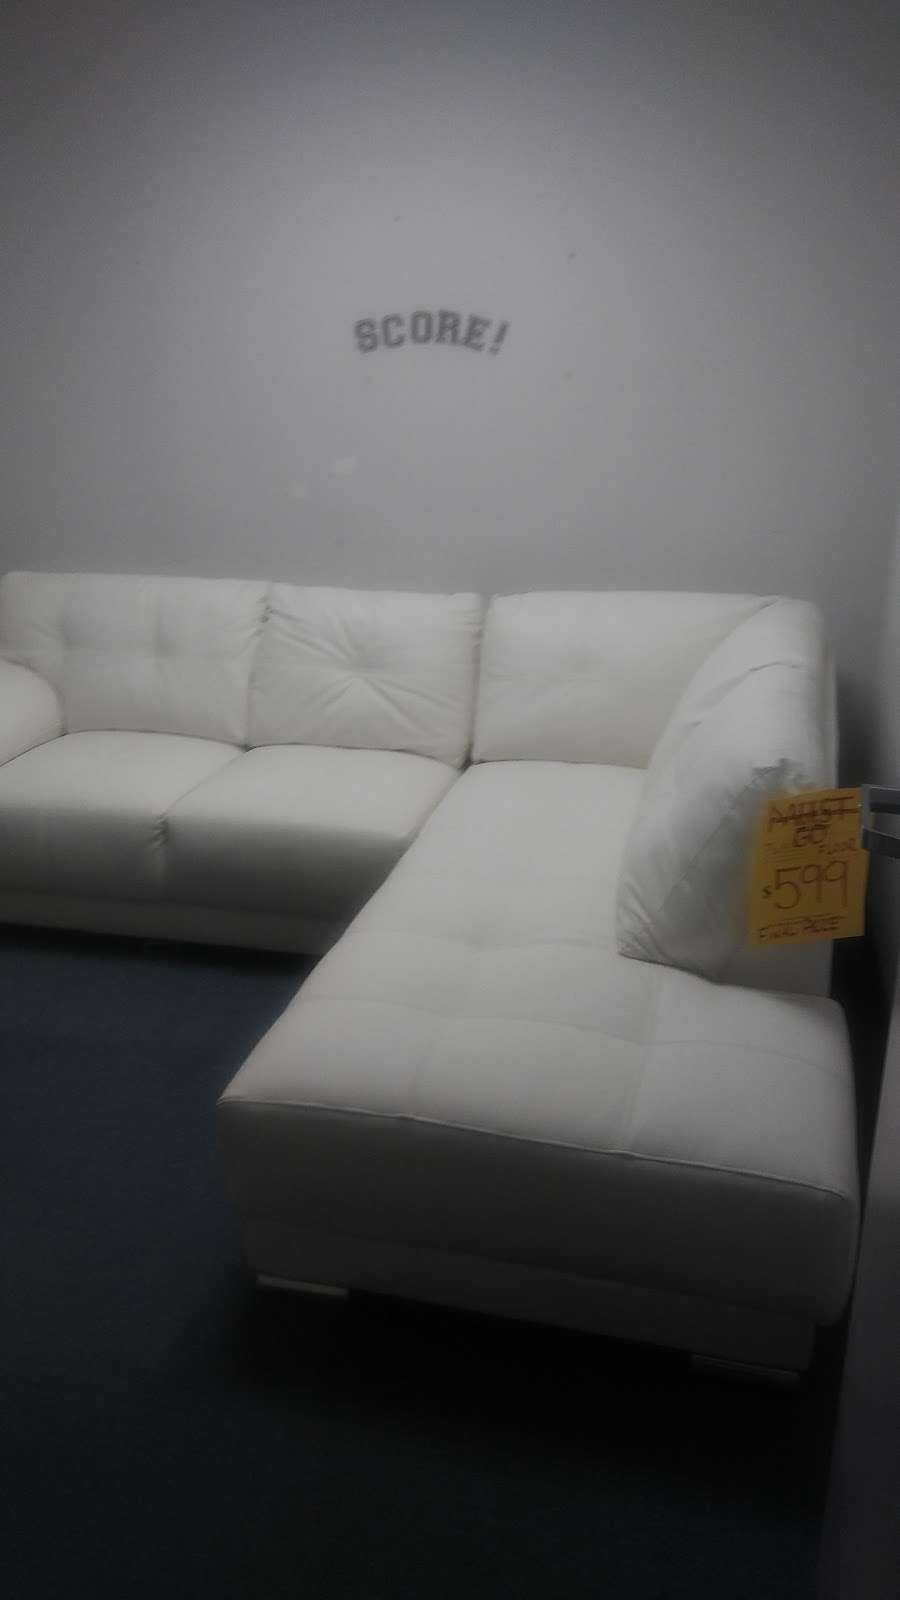 Roomstyle Furniture and Mattress | 9585 Snowden River Pkwy, Columbia, MD 21046, USA | Phone: (410) 312-9800